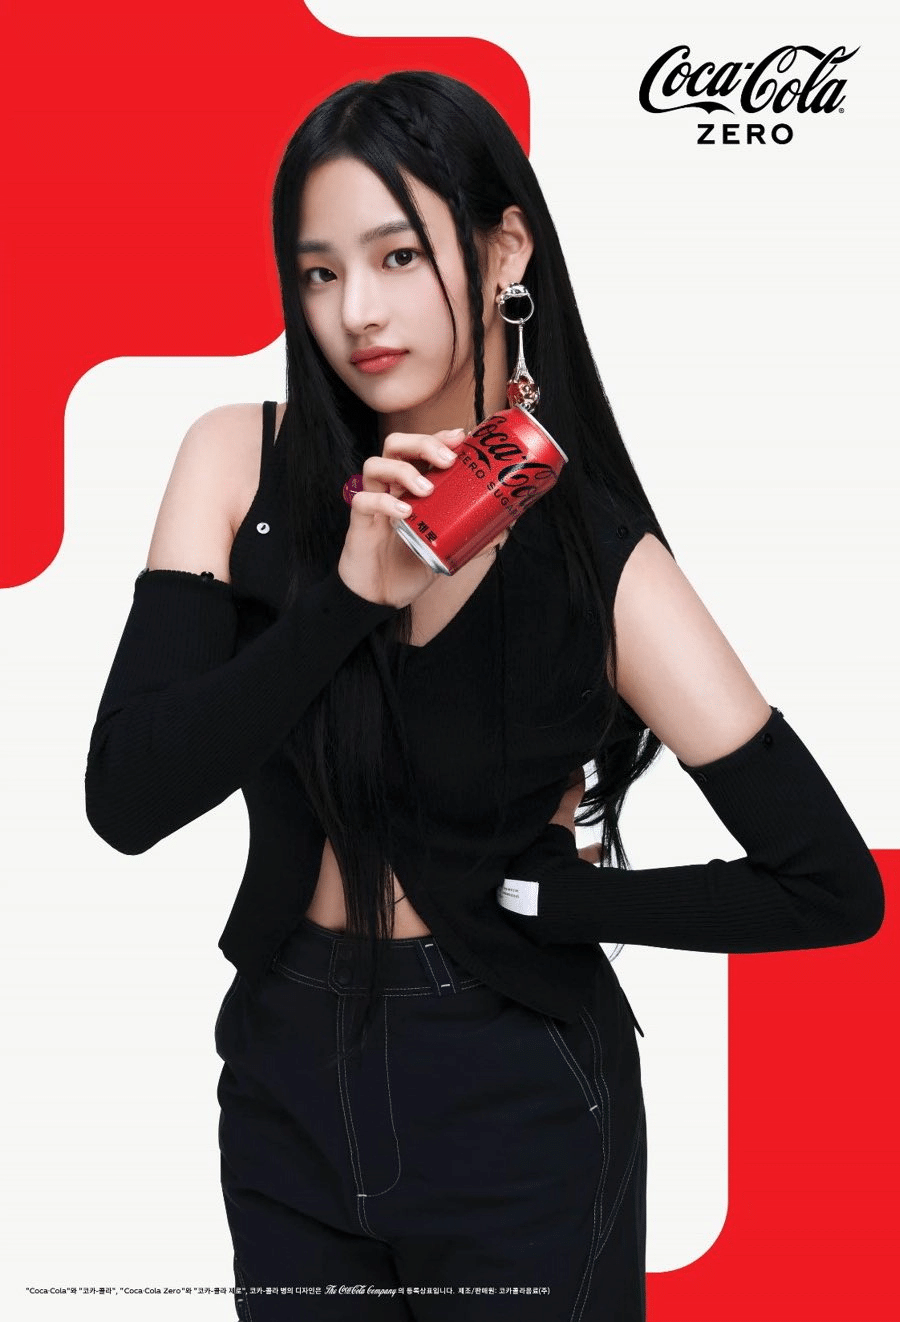 230330 NewJeans has been announced as the new global brand ambassador for  Coca-Cola : r/NewJeans